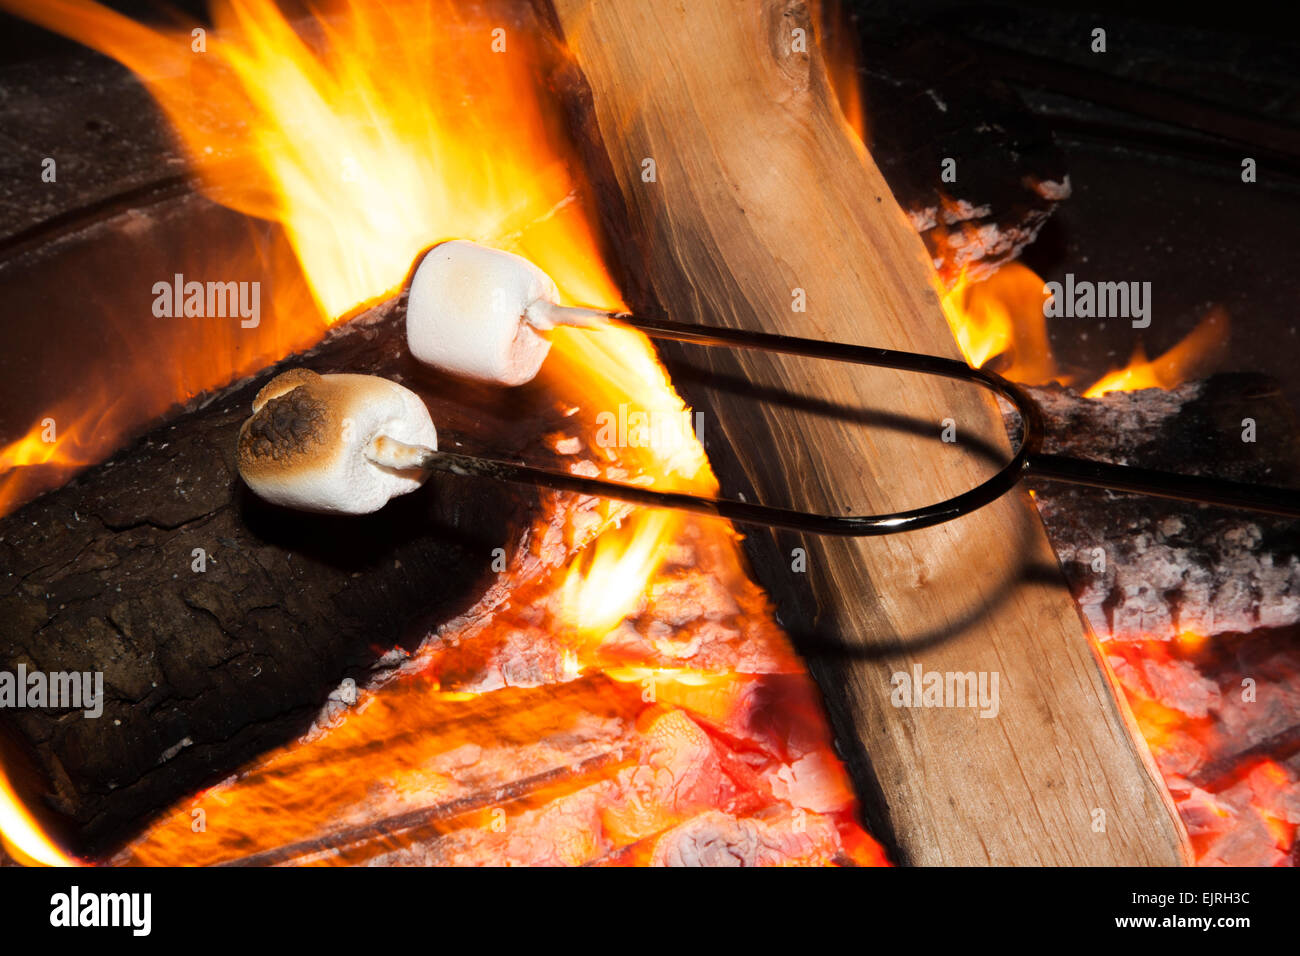 A fire glows brightly in a firepit while marshmallows are roasted. Stock Photo